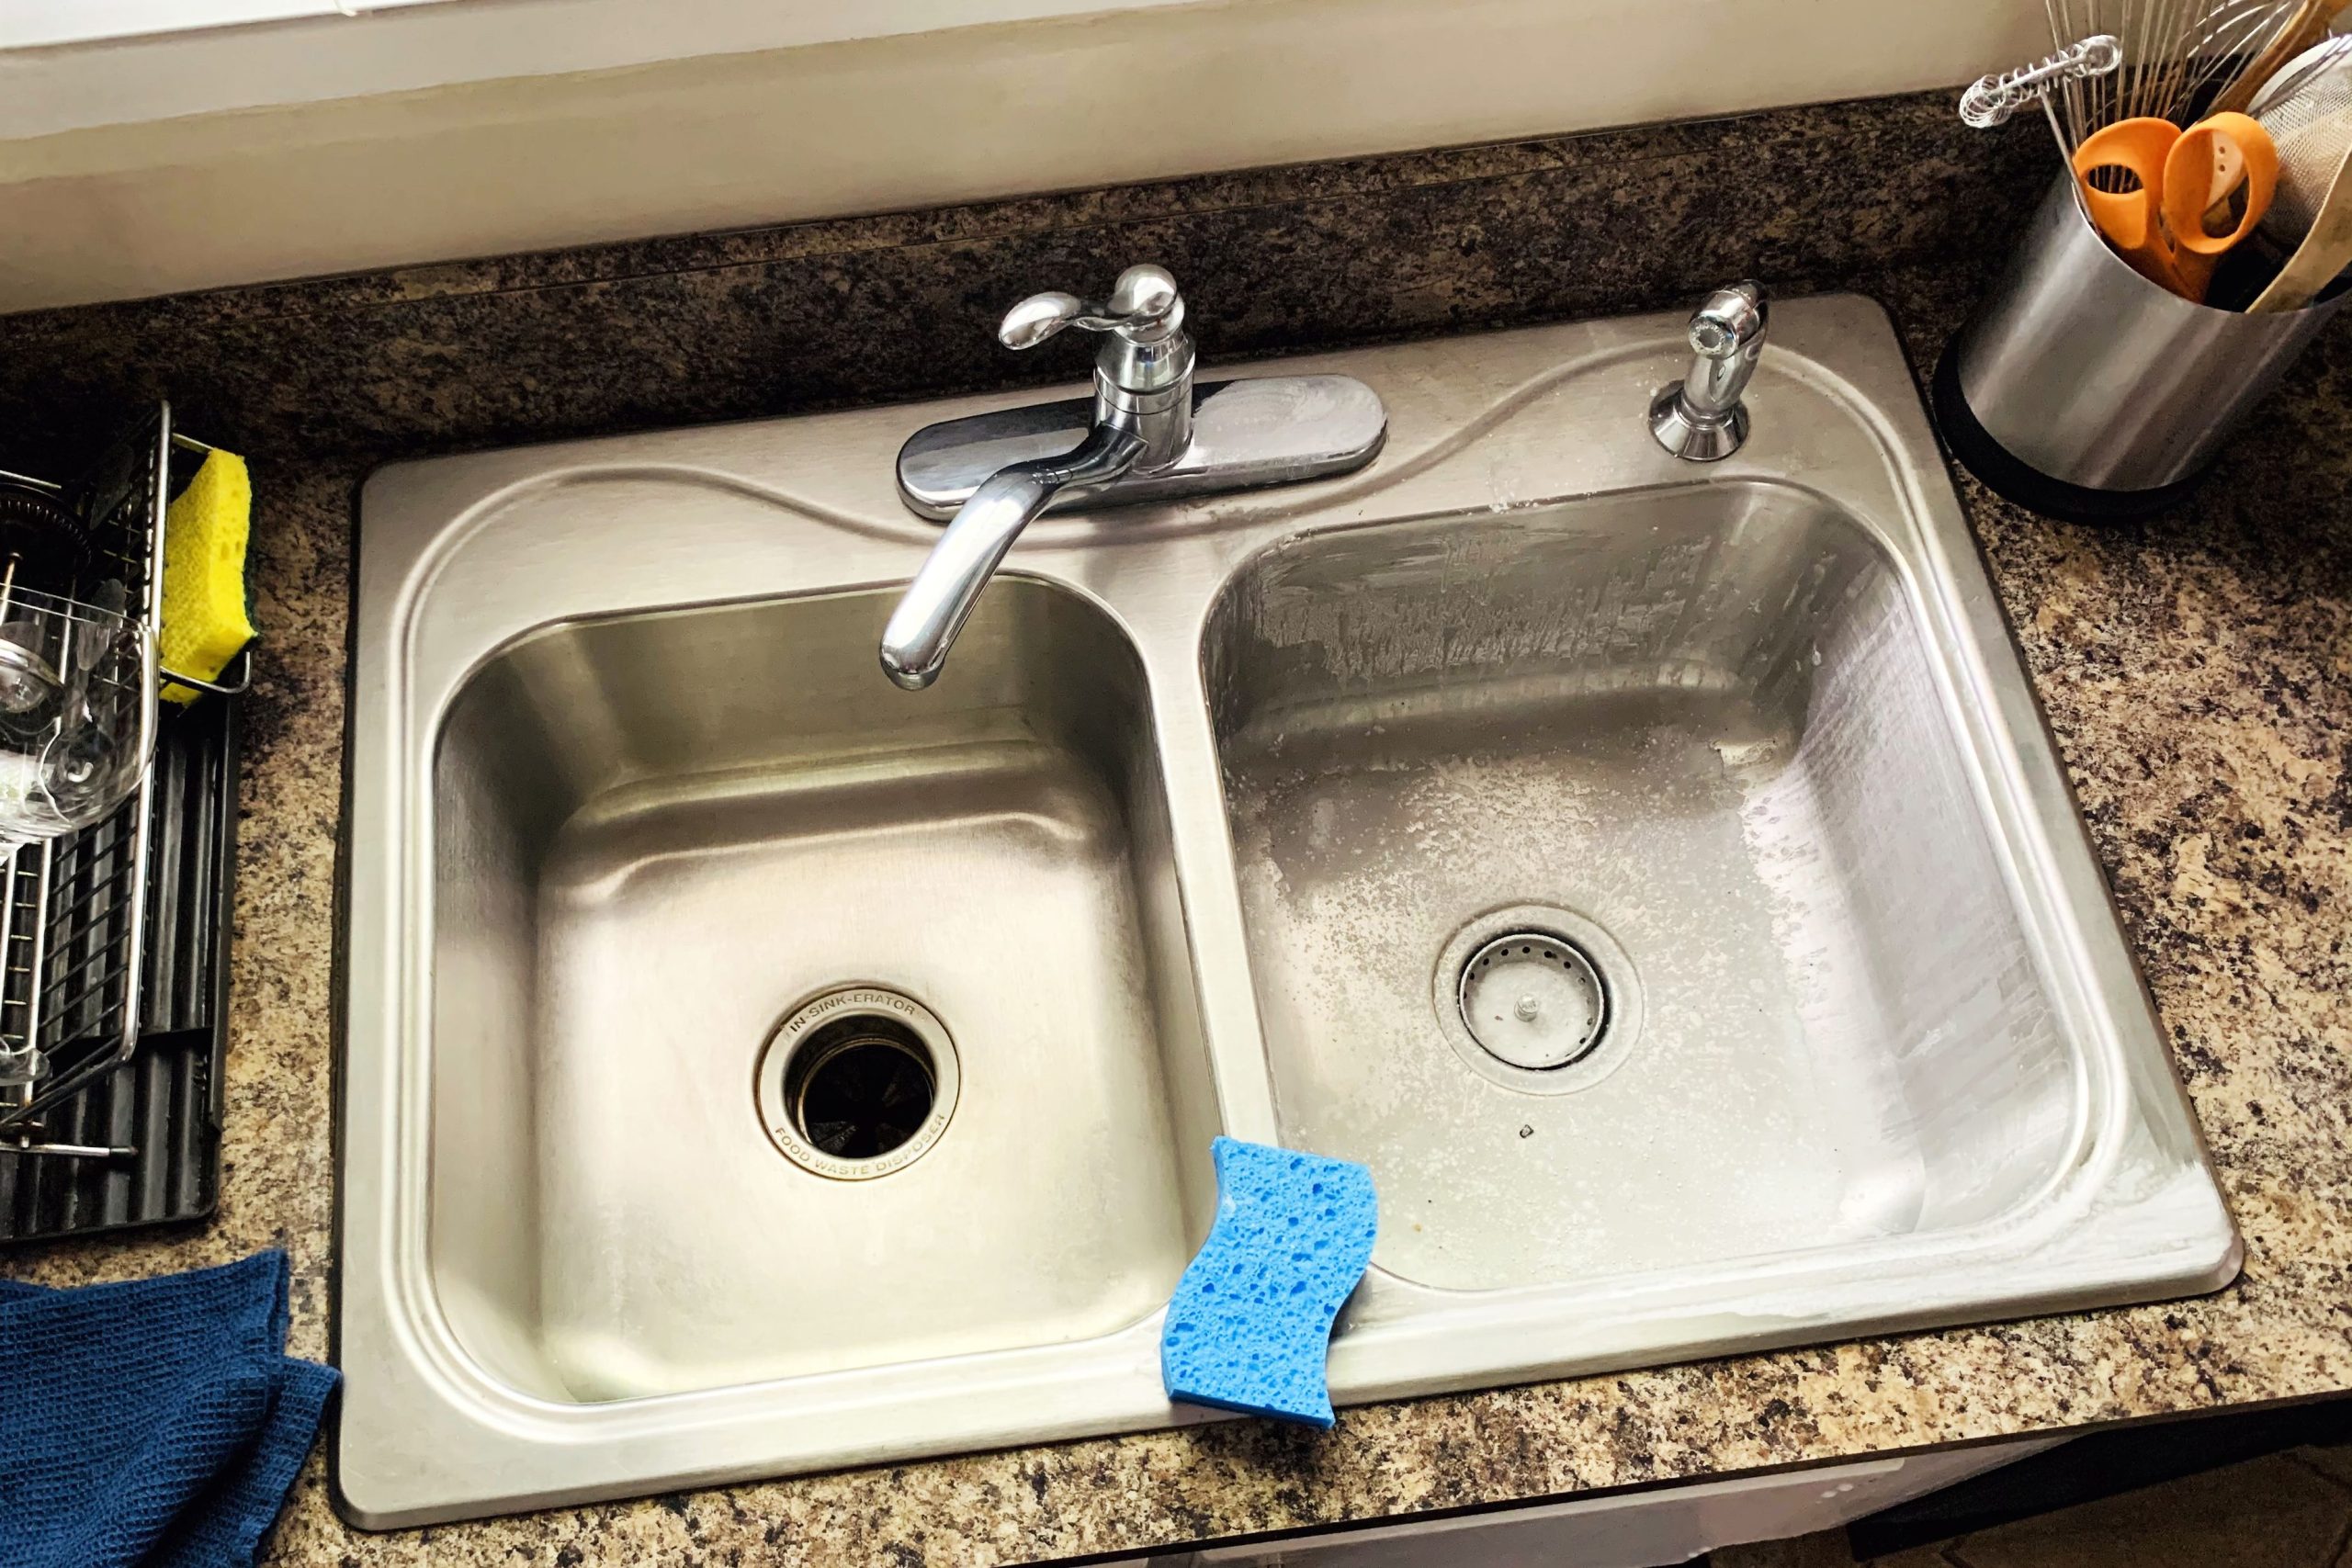 Multi-Purpose Sink for Cleanup and Material Preparation